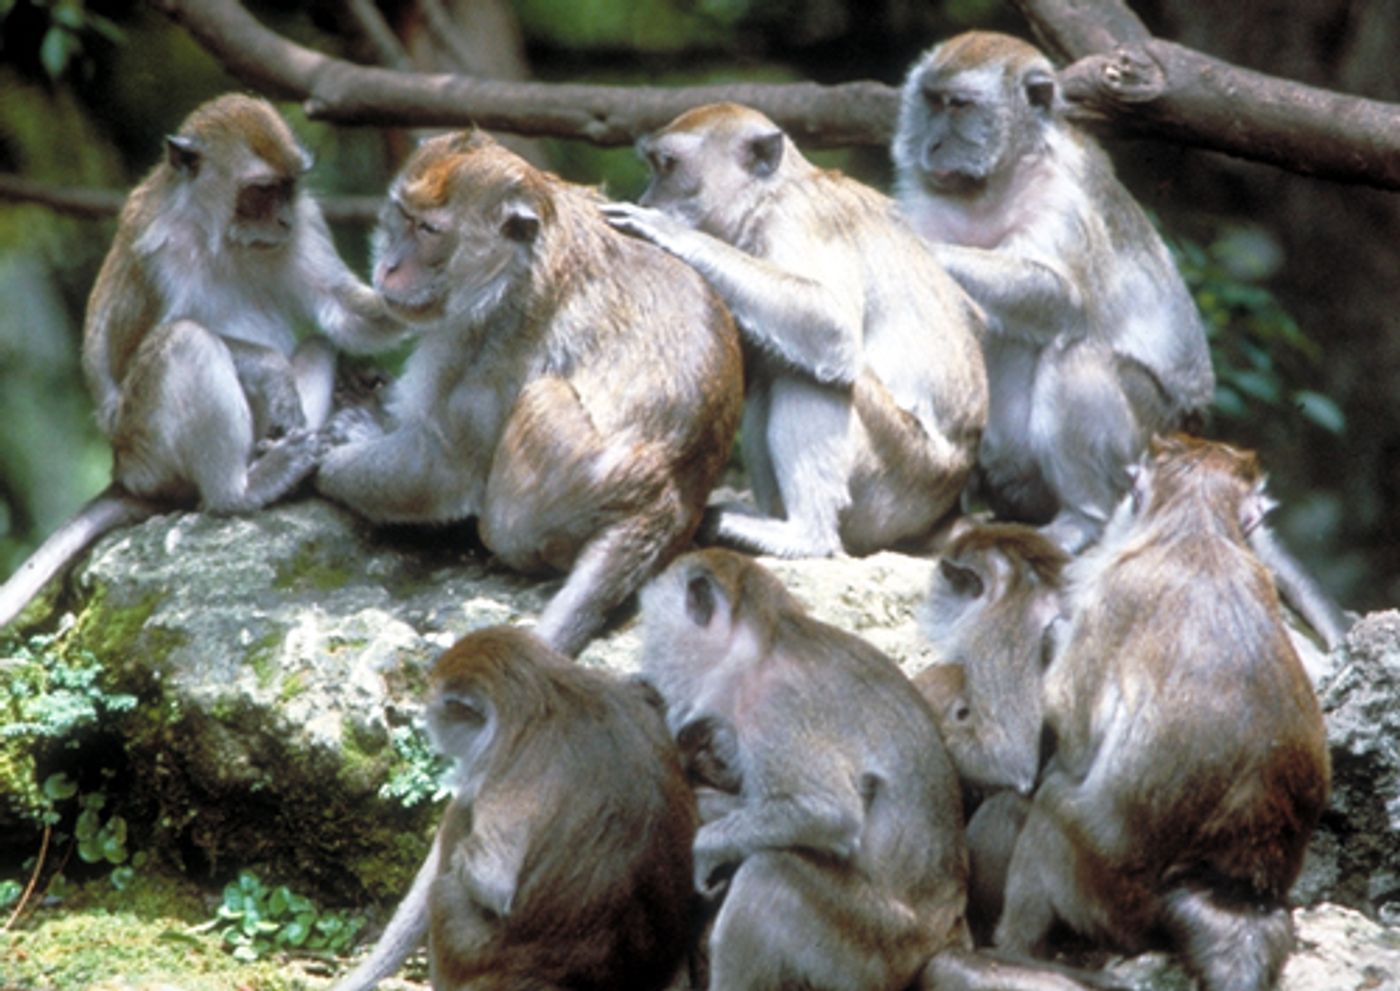 Long-tailed macaques, pictured, use rocks as tools for opening nuts and oysters.